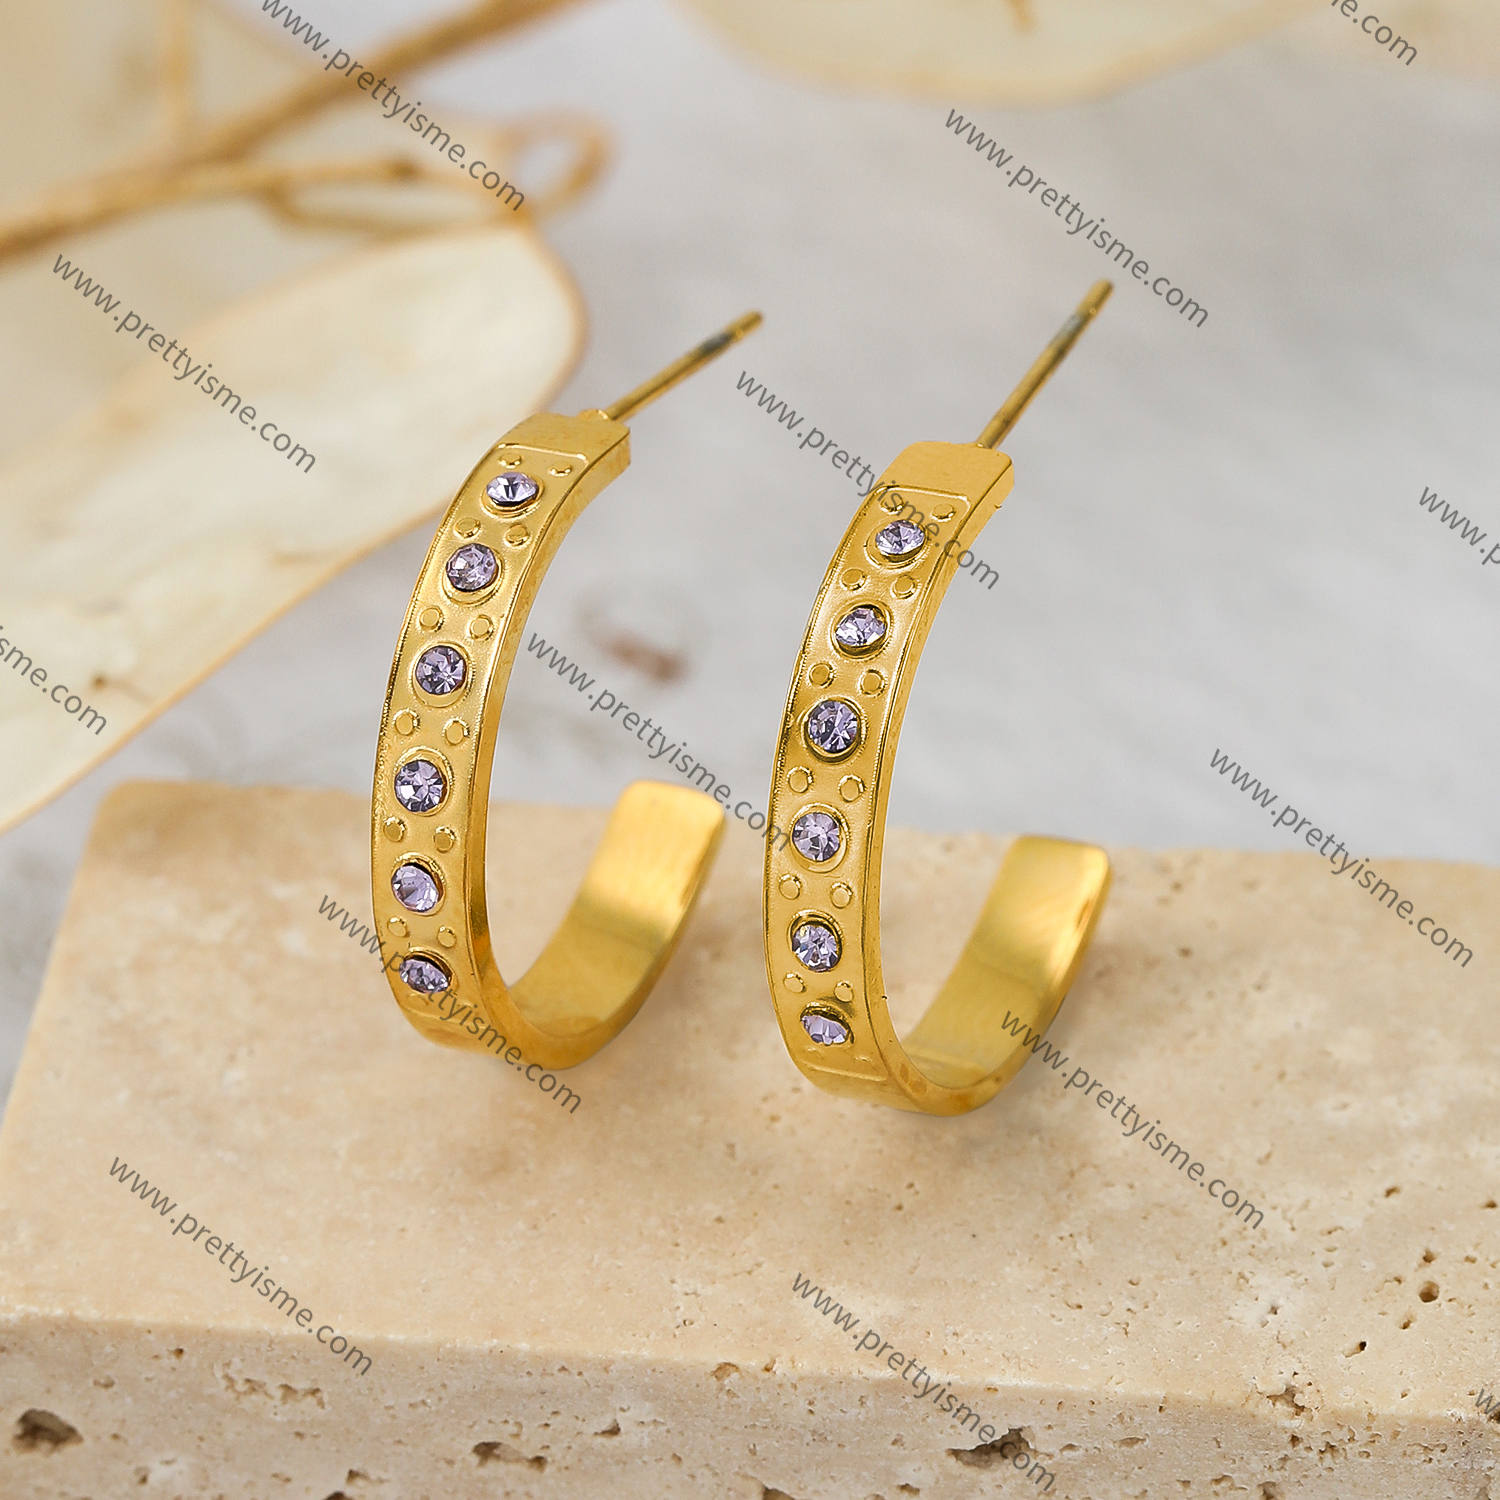 Half Curved Stainless Steel Earrings 18K Gold Plated Water Resistant with Purple Zircon.webp